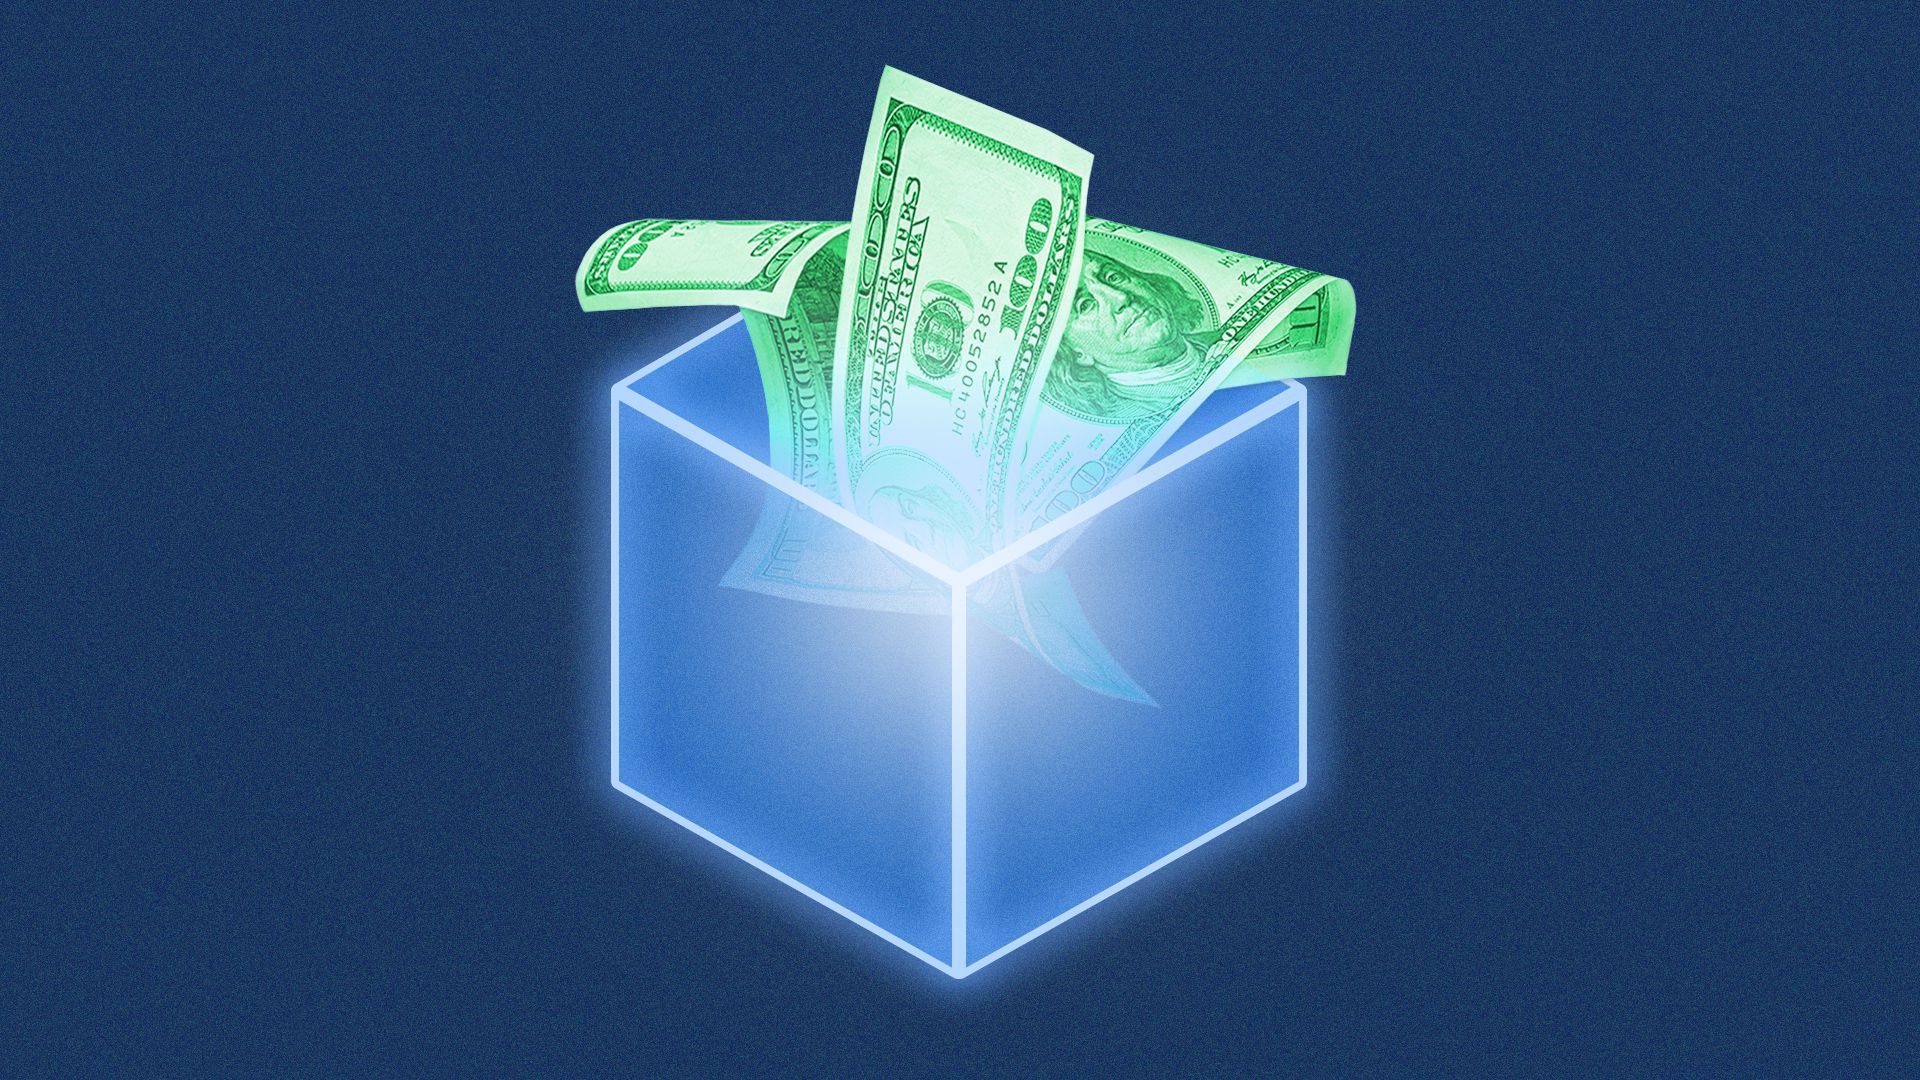 A glowing cube or block, with money in it.